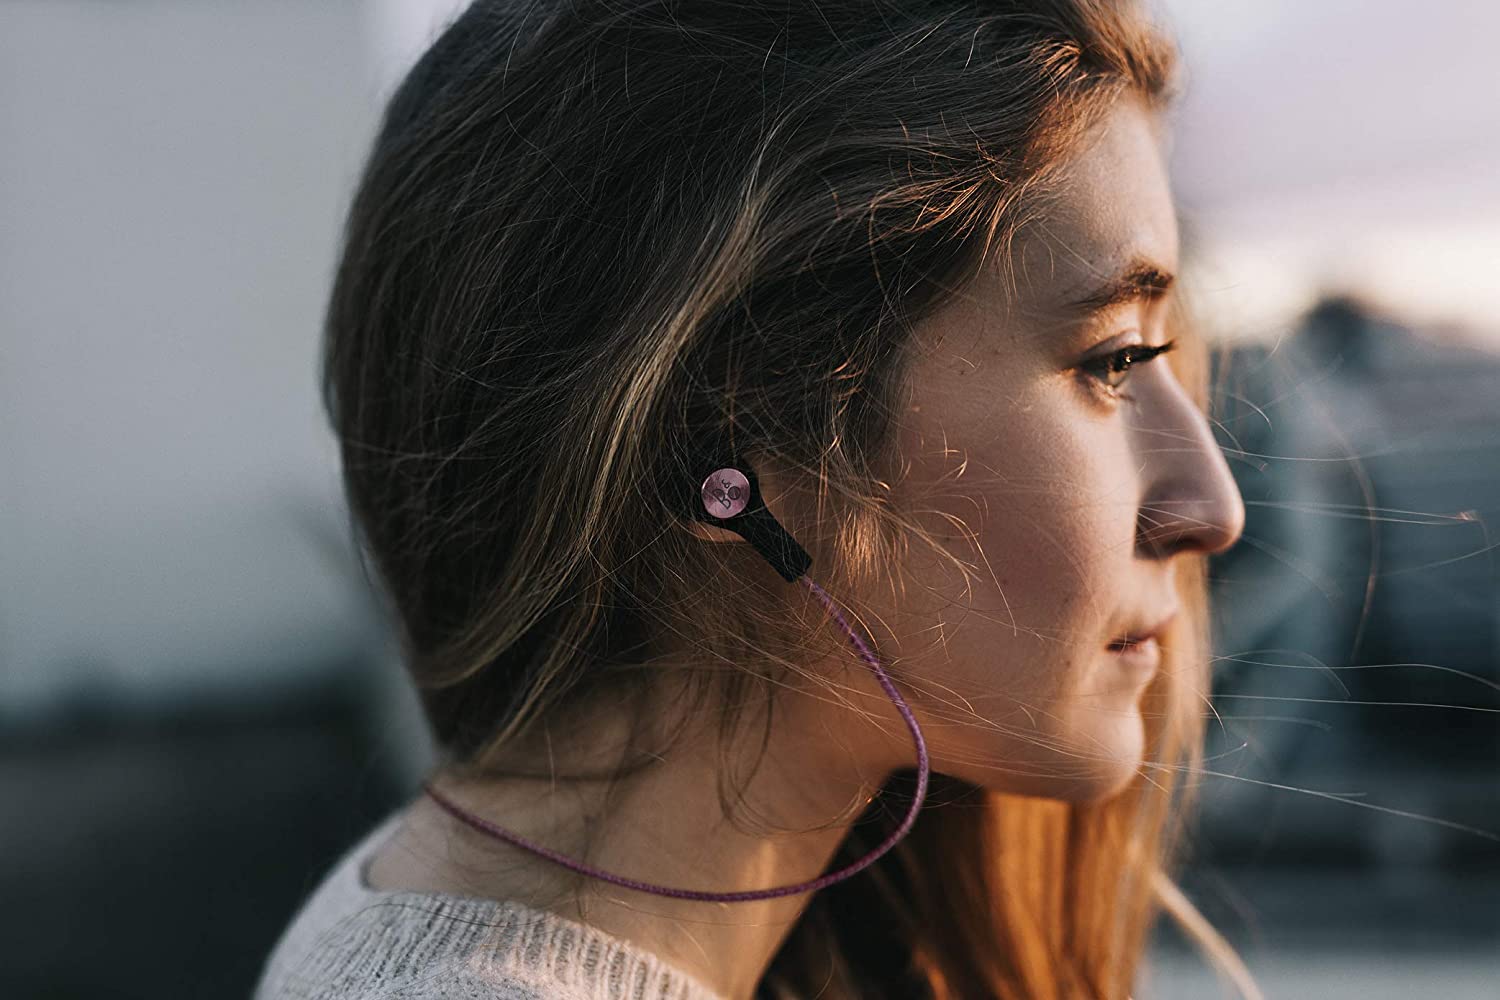 Bang & Olufsen Beoplay H5 Splash and Dust Proof Wireless Earphones rose ear buds on woman